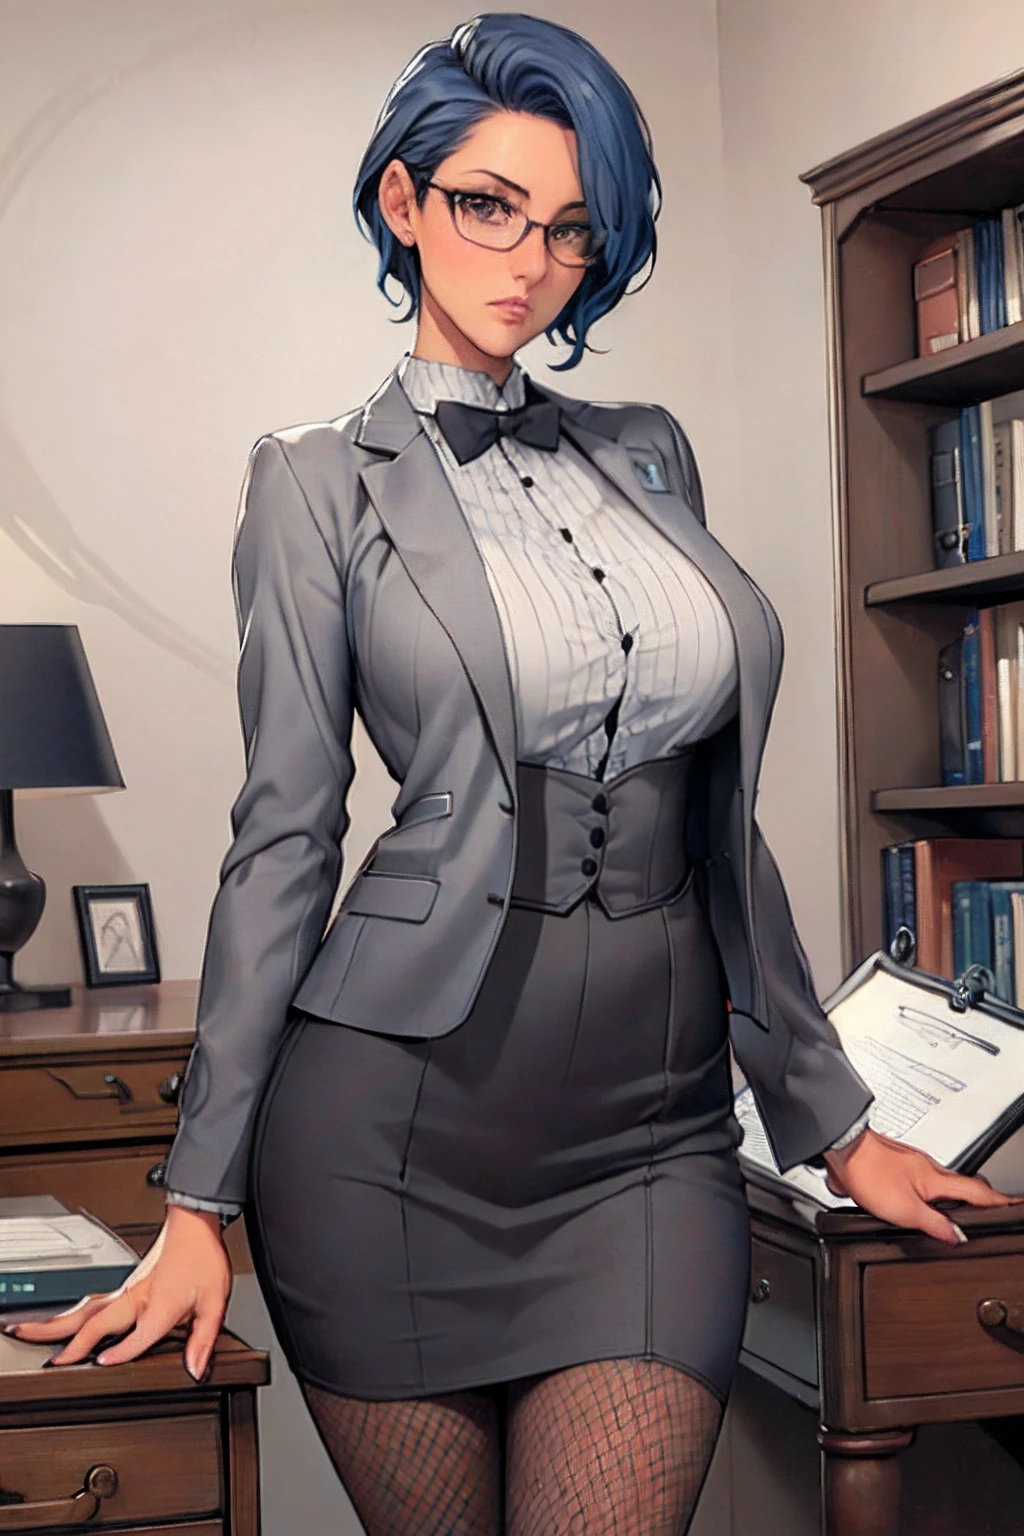 Secretary outfit, grey mini rock, white shirt, grey jacket, fishnets, adult, 35 years old, beautiful women, blue hair, short hair, office hair cut, glasses, brown eyes, beautiful brown eyes, strict gaze, serious expression, tall women, big breasts, slim body, clipboard in hands, masterpiece, antique office background, bookshelves